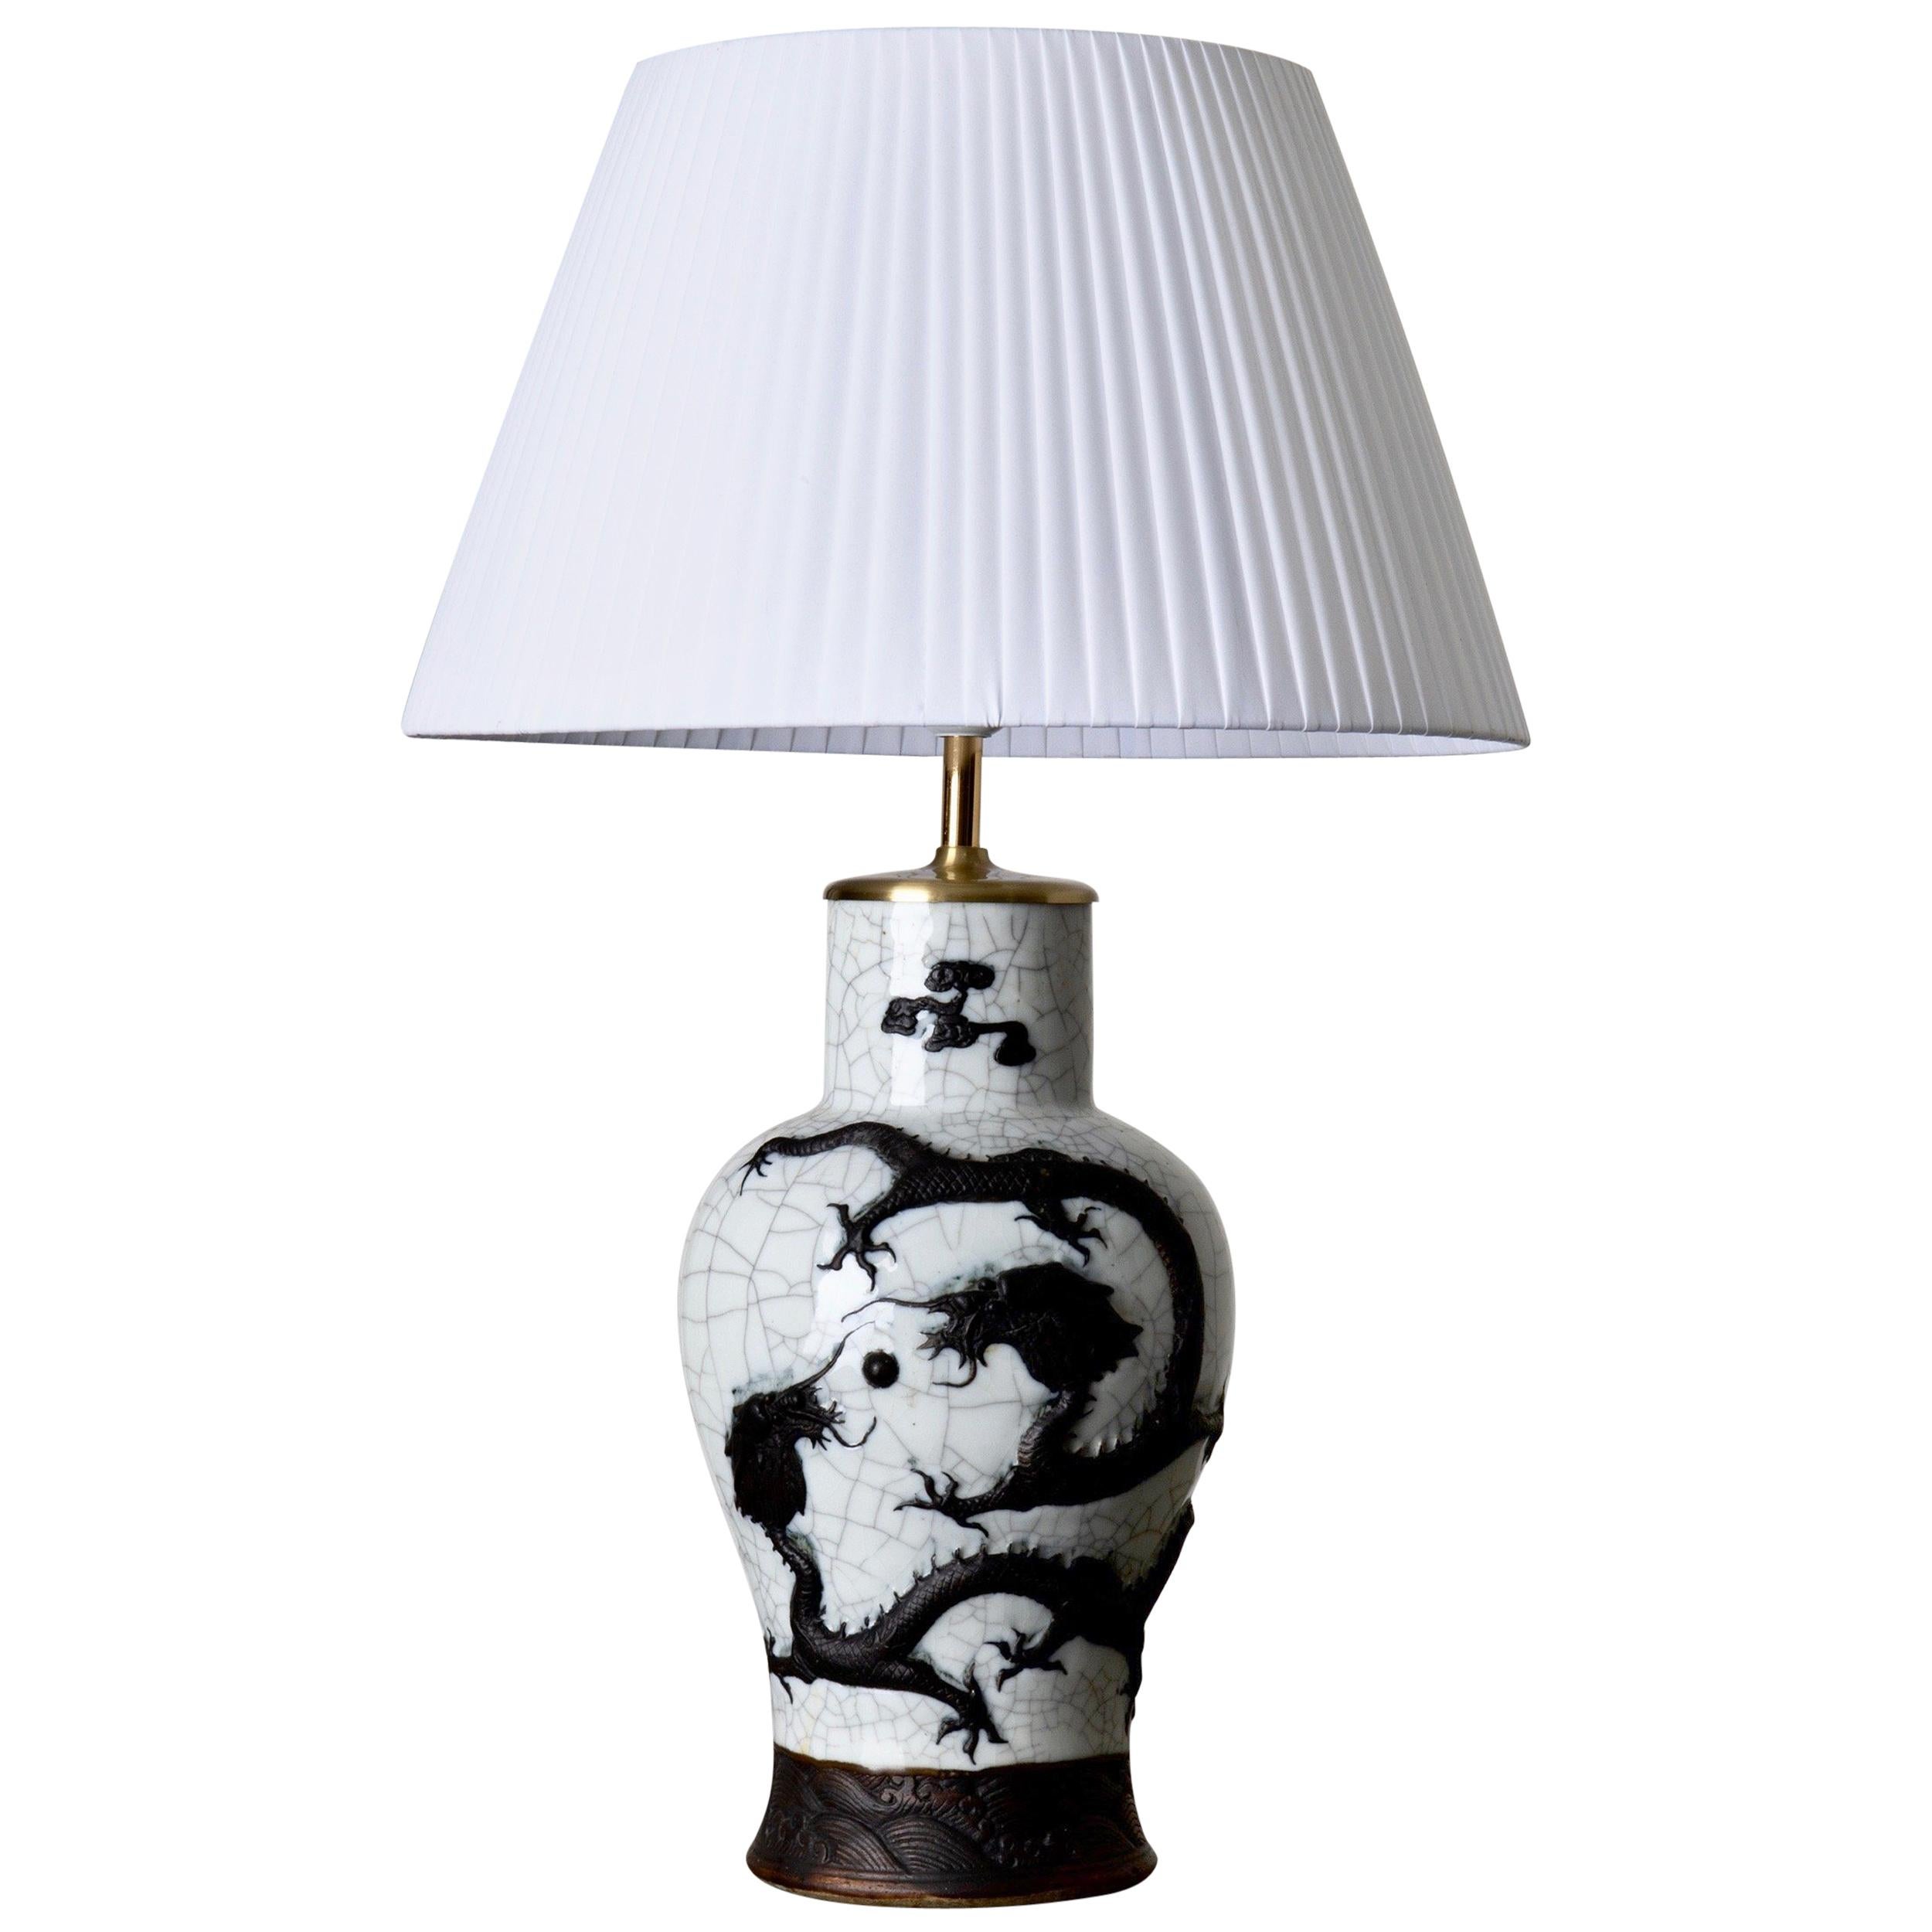 Table Lamp Black and White Porcelain, China